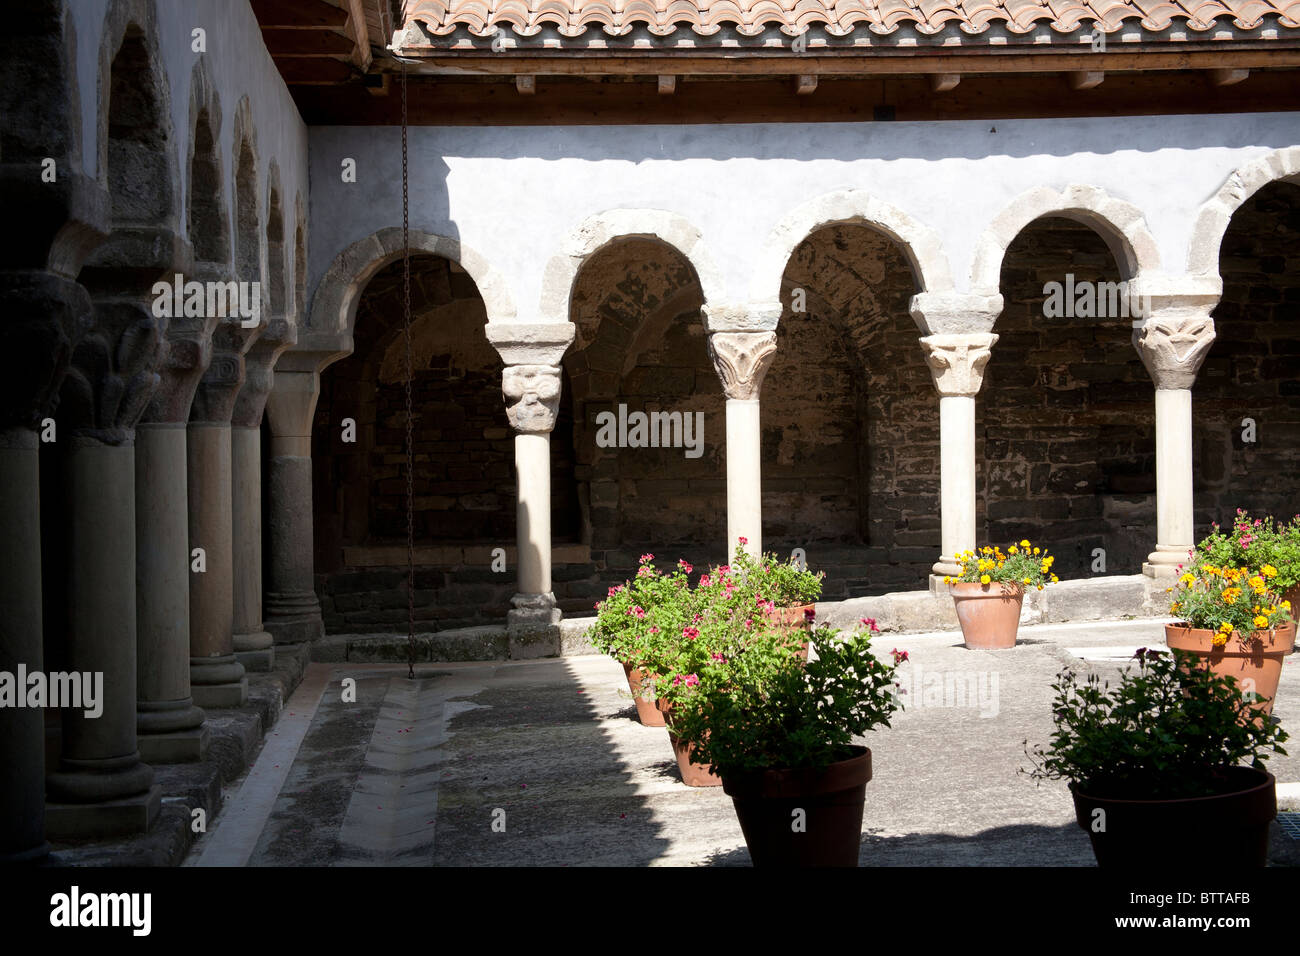 The central patio of the Monastery of Casserres, Catalonia Spain Stock Photo